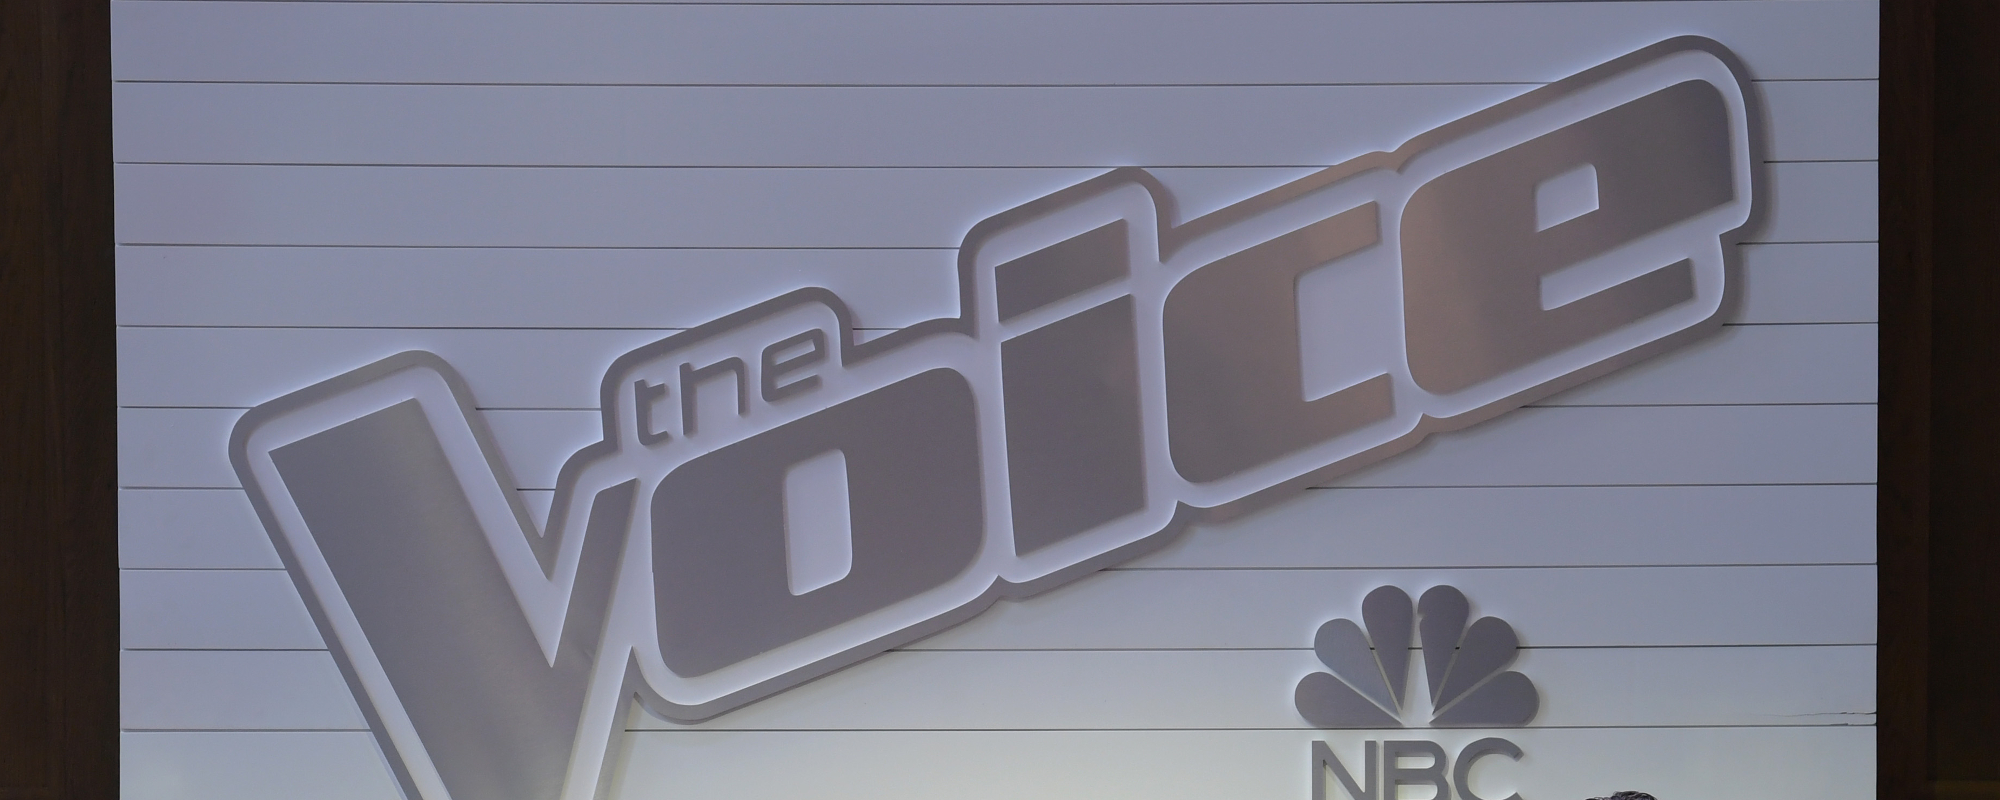 A Beloved Former Coach is Returning to ‘The Voice’ in New Role for Season 24 Live Shows